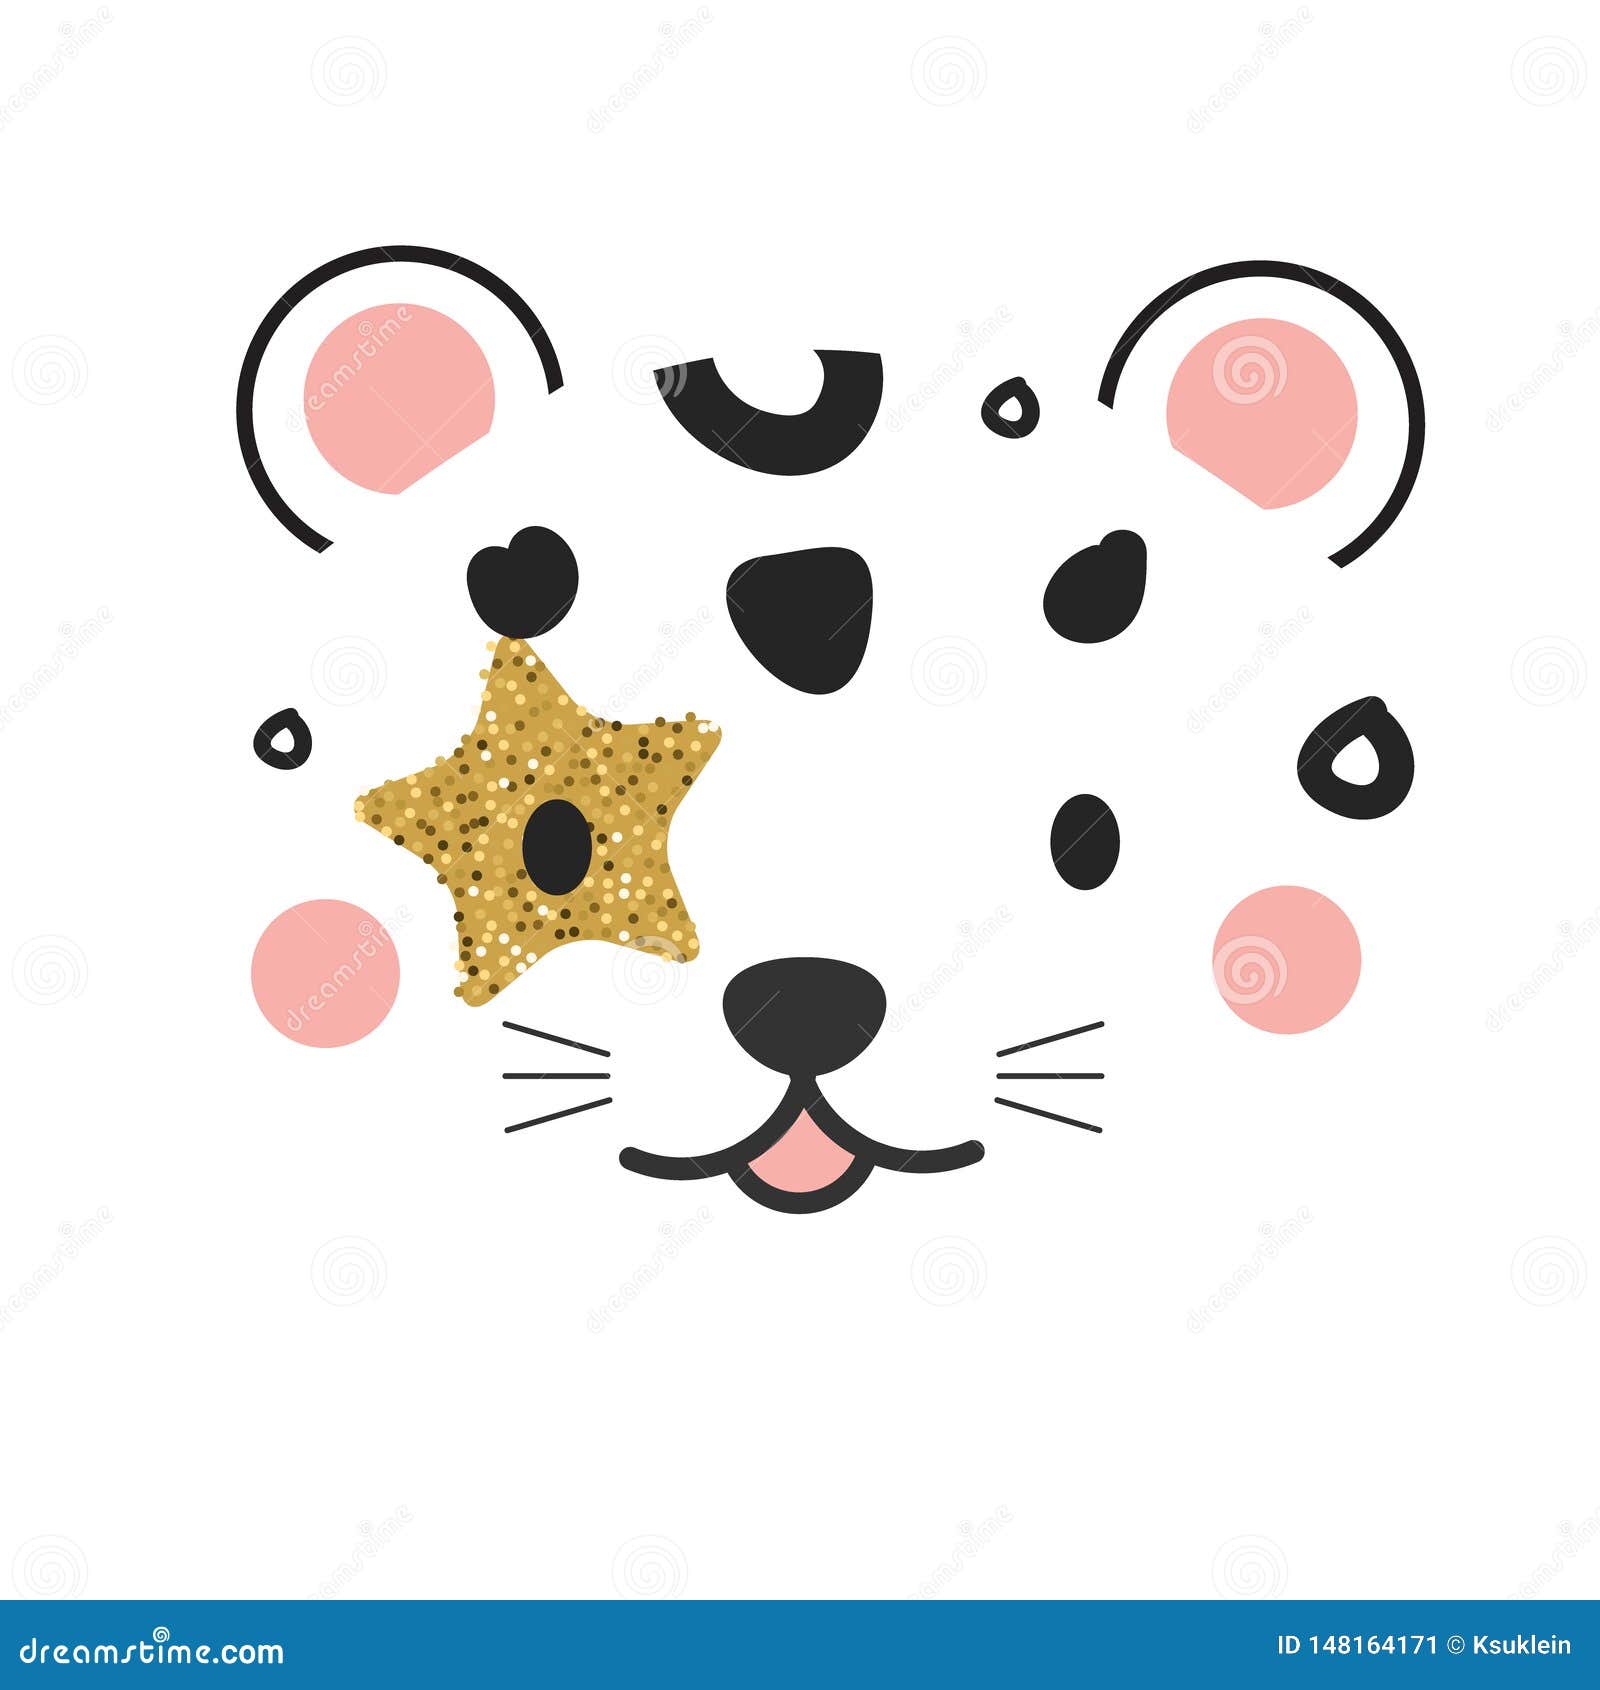 Cute Leopard Face Jungle Animal In Scandinavian Style For Kids Fashion Prints And Children Design Nursery Decoration Stock Vector Illustration Of Happy Clothes